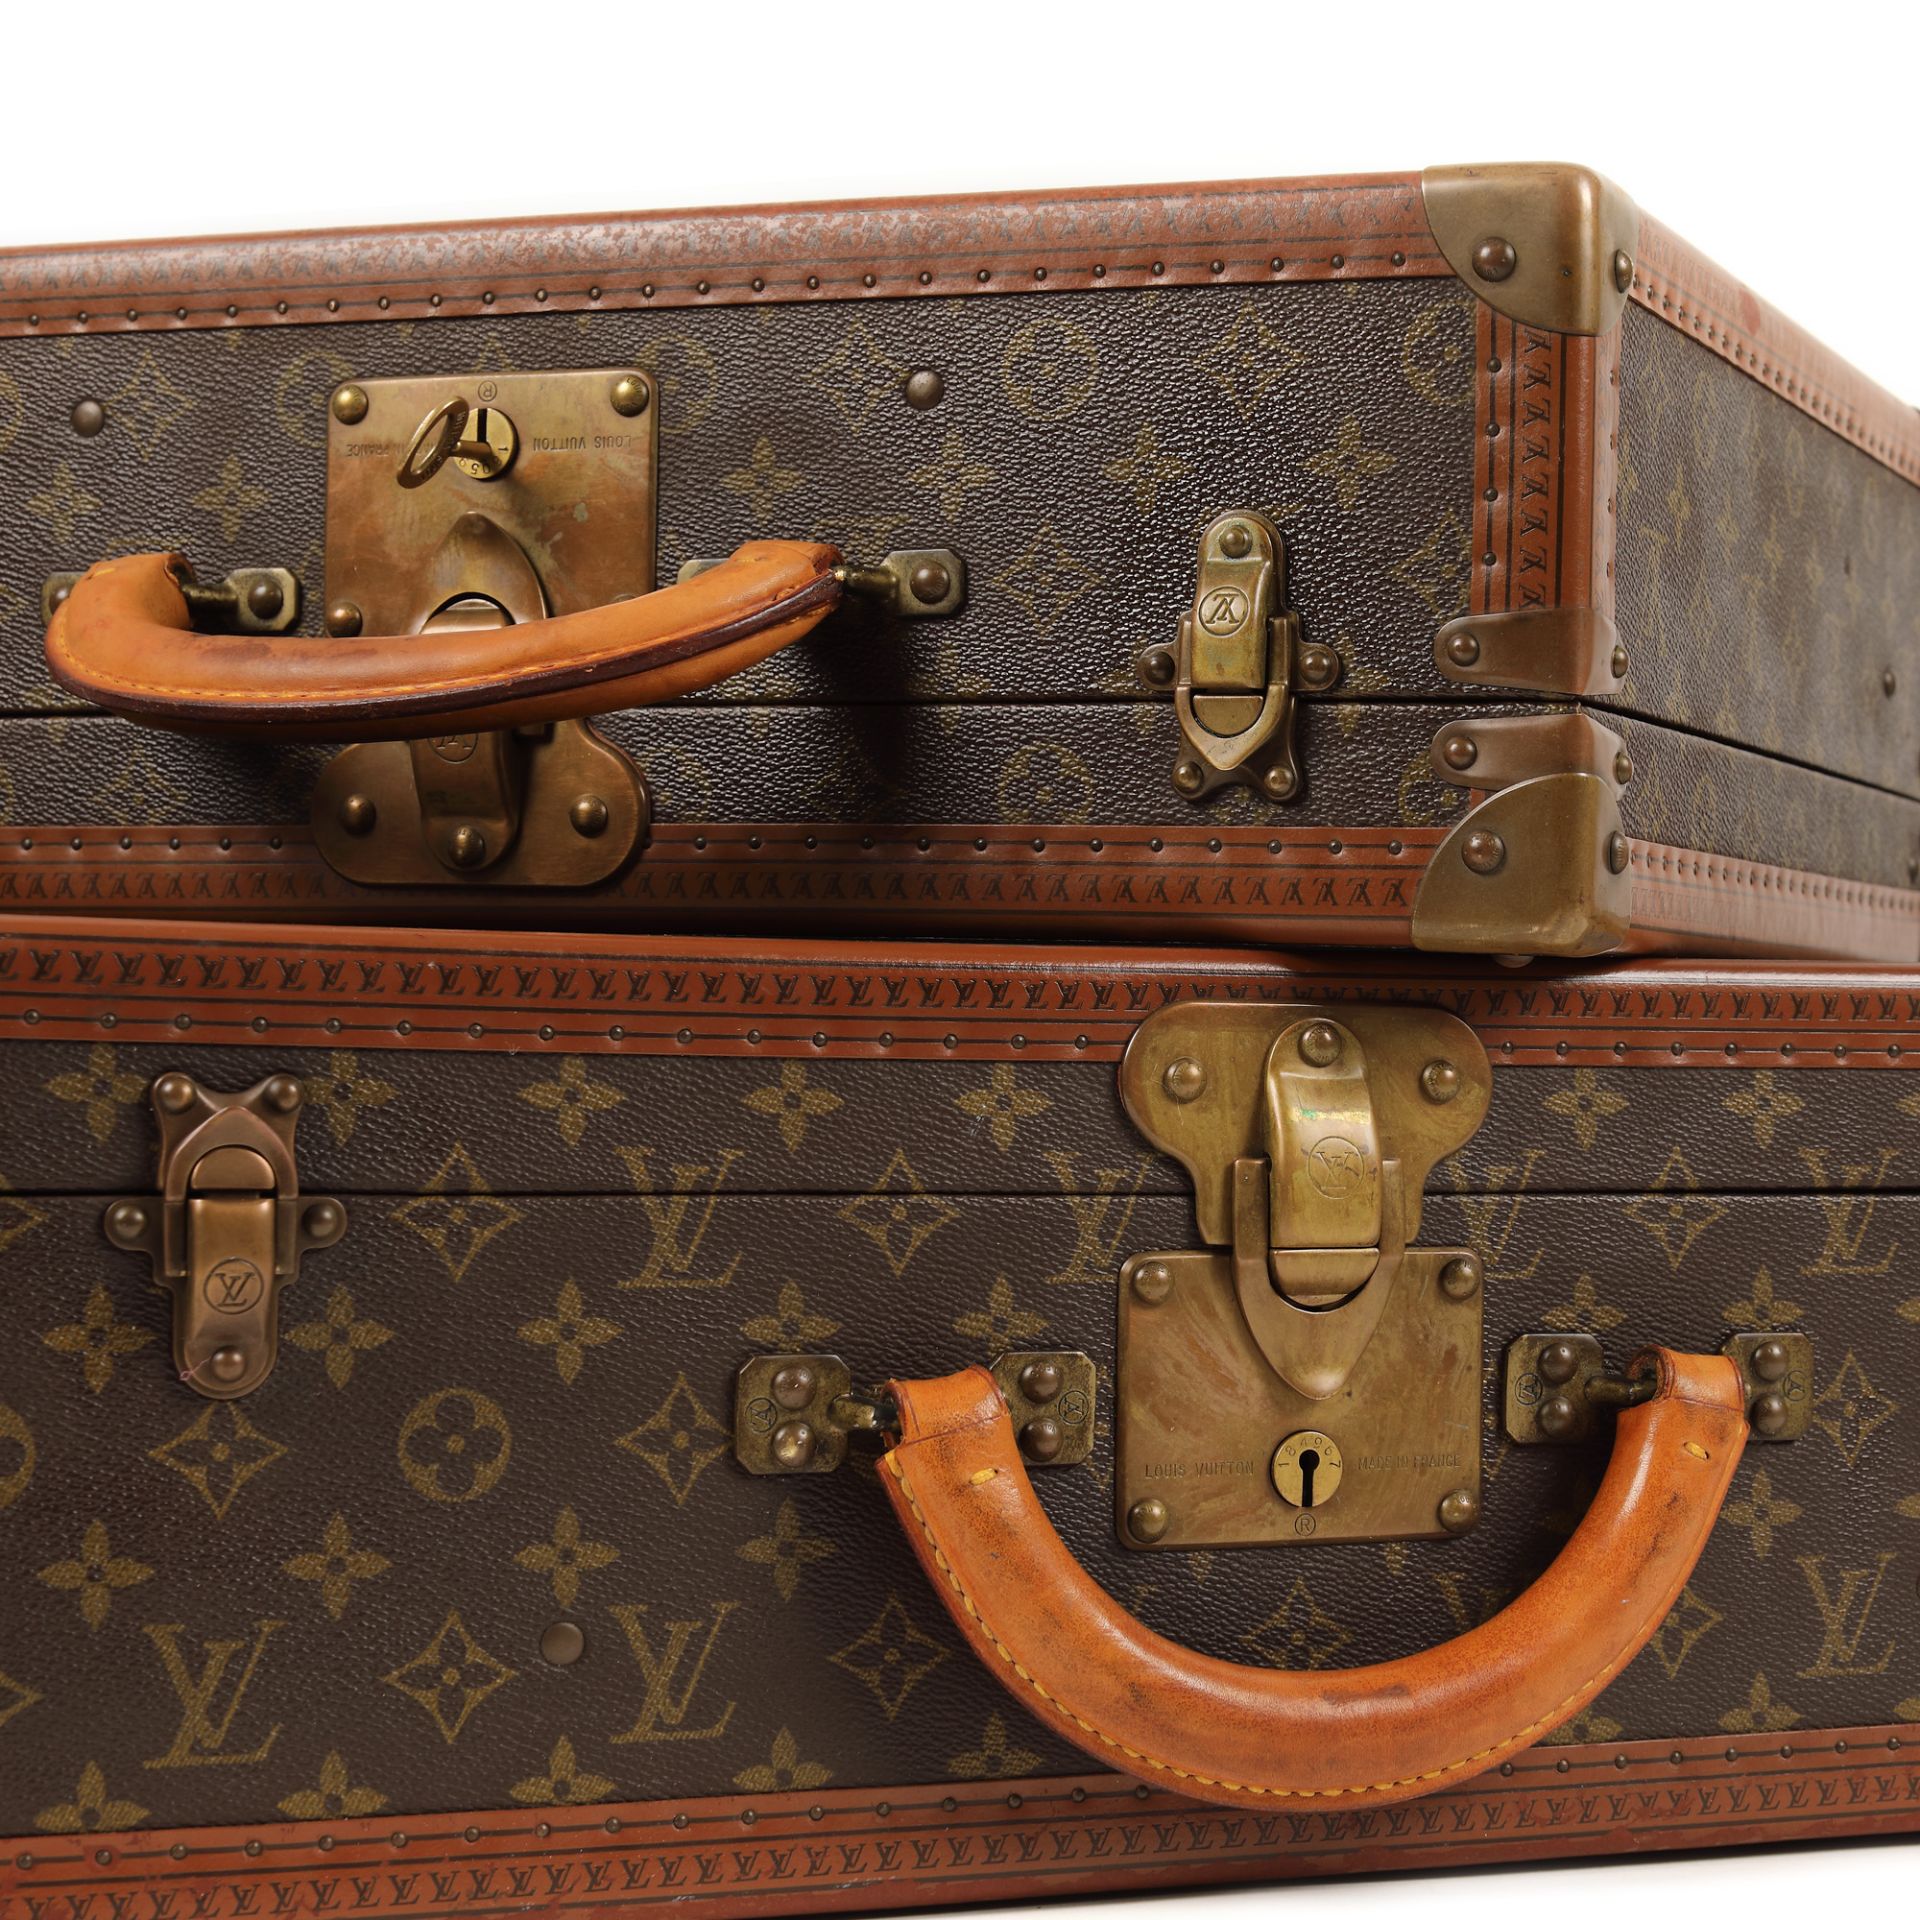 Pair of Louis Vuitton suitcases for travel - Image 7 of 8